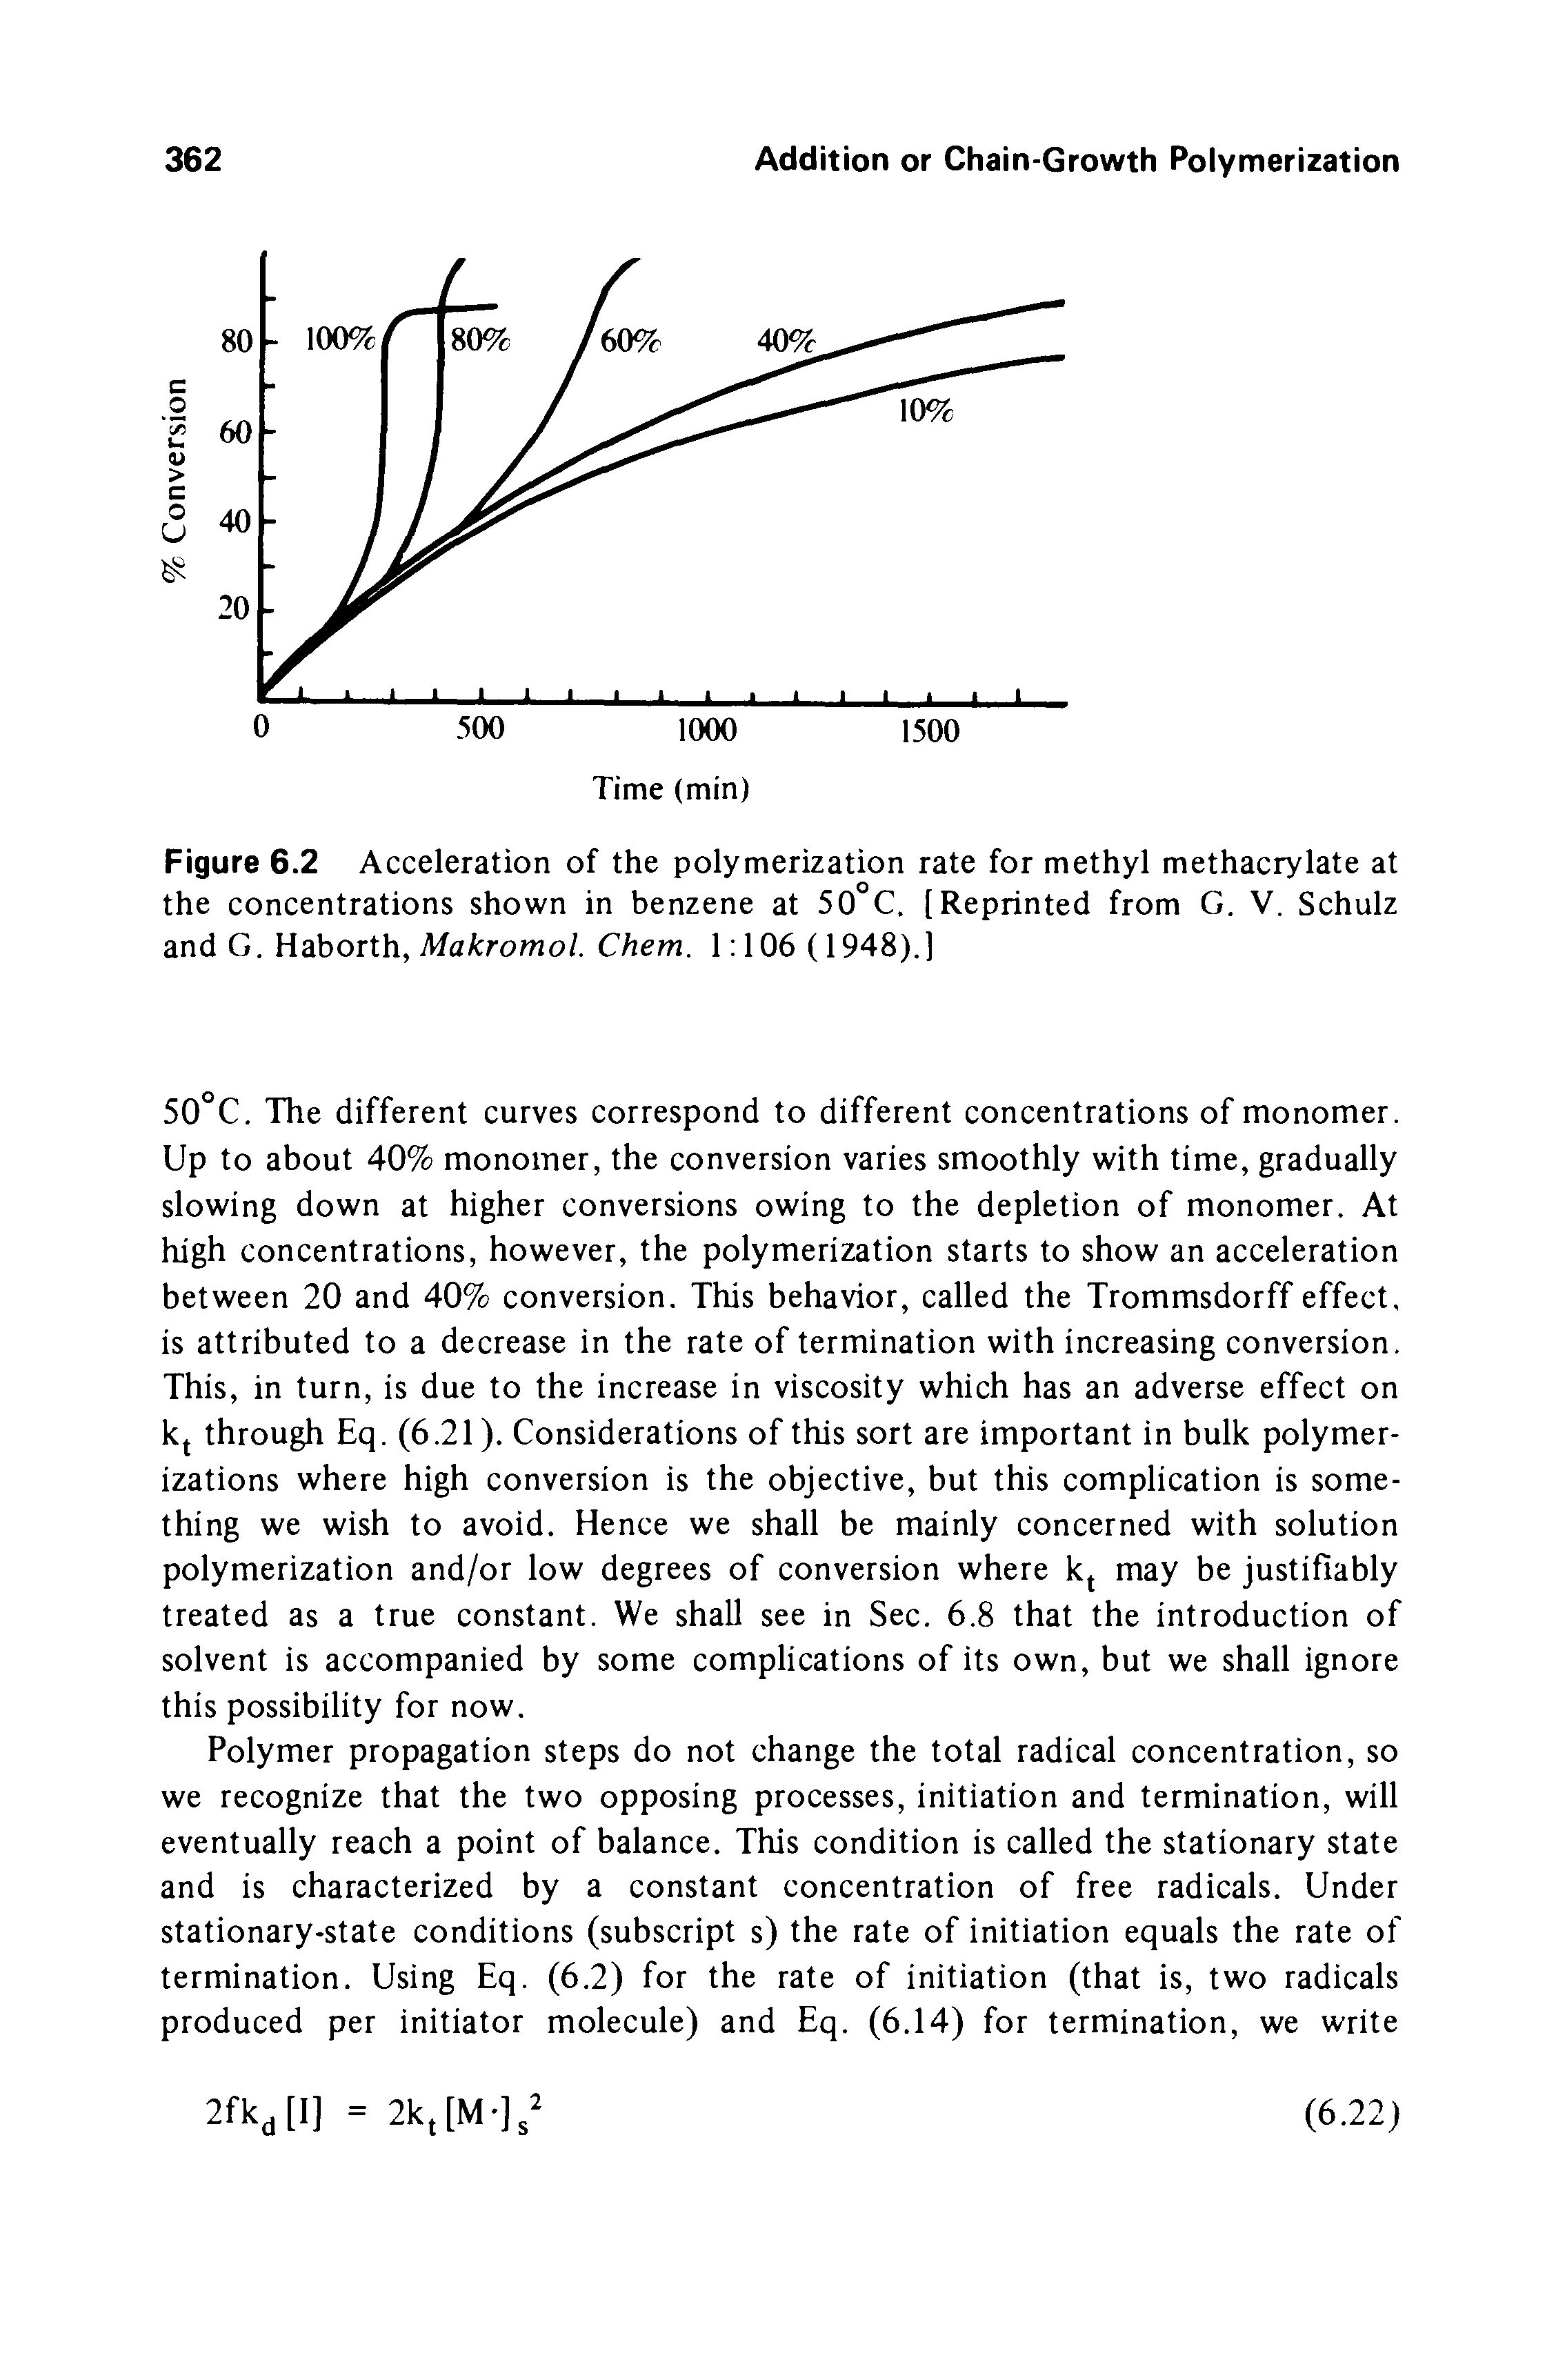 Figure 6.2 Acceleration of the polymerization rate for methyl methacrylate at the concentrations shown in benzene at 50 C. [Reprinted from G. V. Schulz and G. Haborth, Makromol. Chem. 1 106 (1948).]...